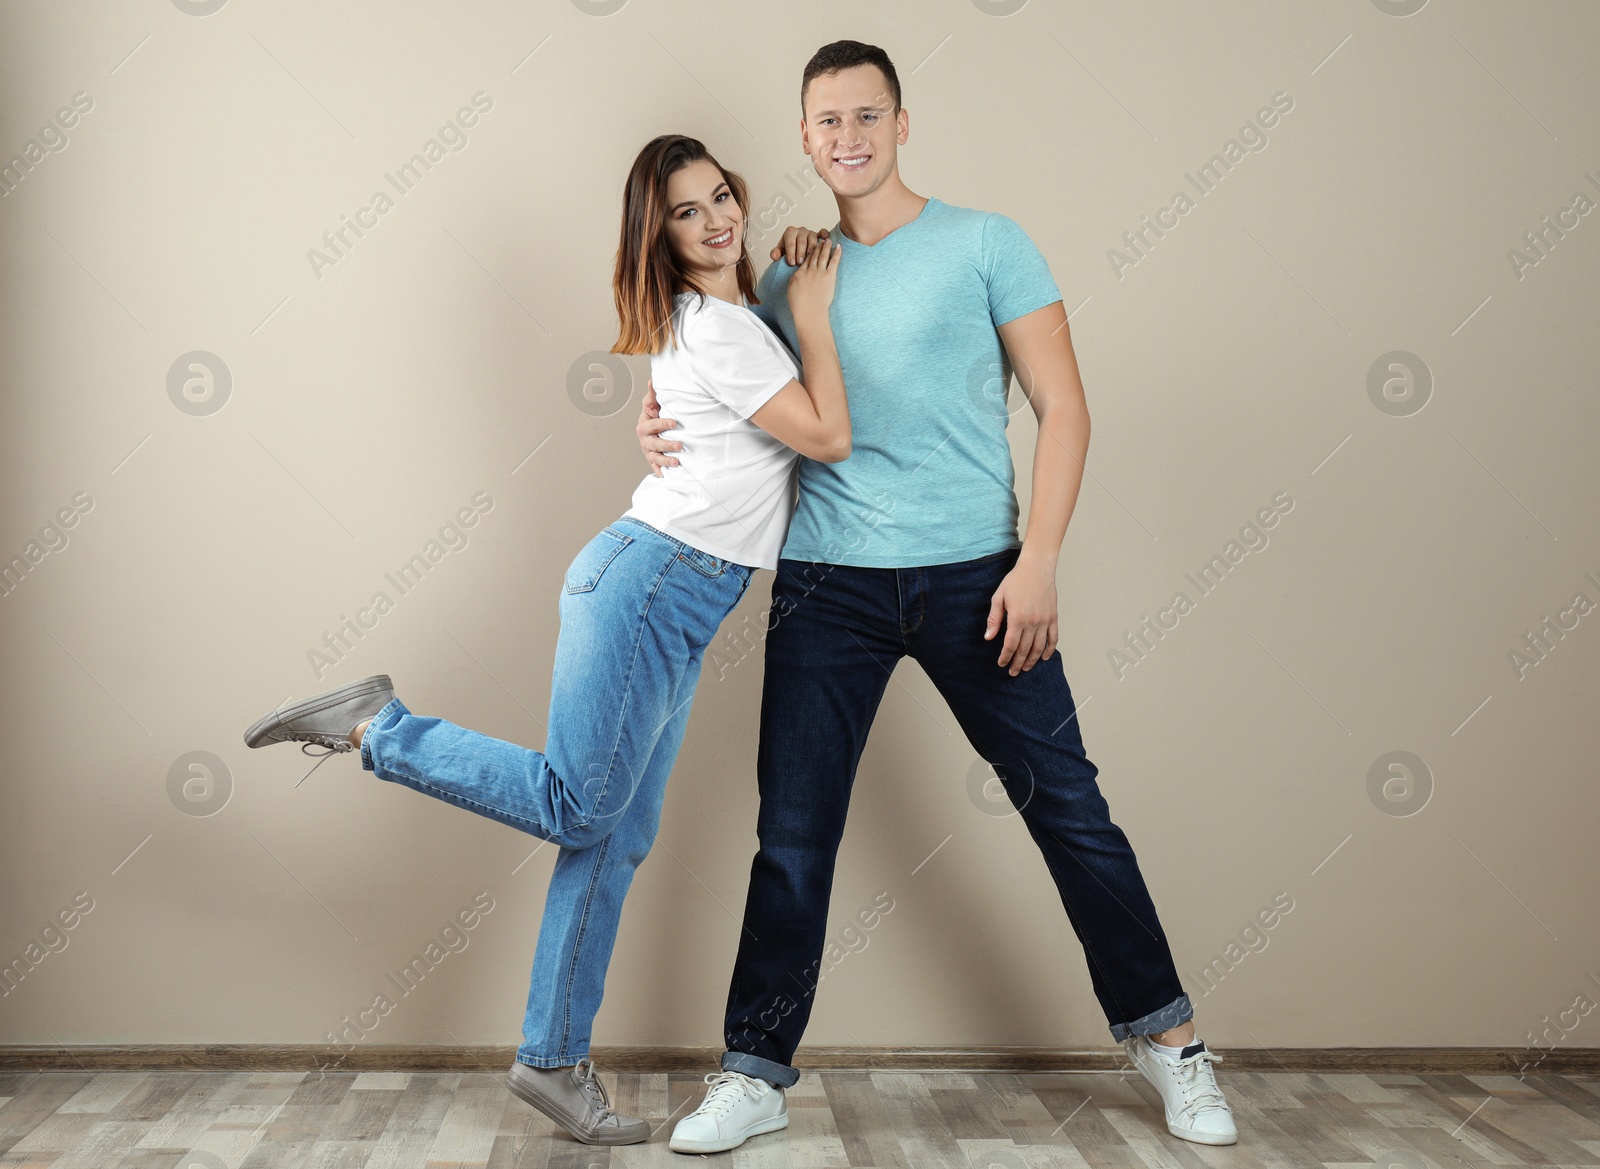 Photo of Happy young couple dancing near beige wall